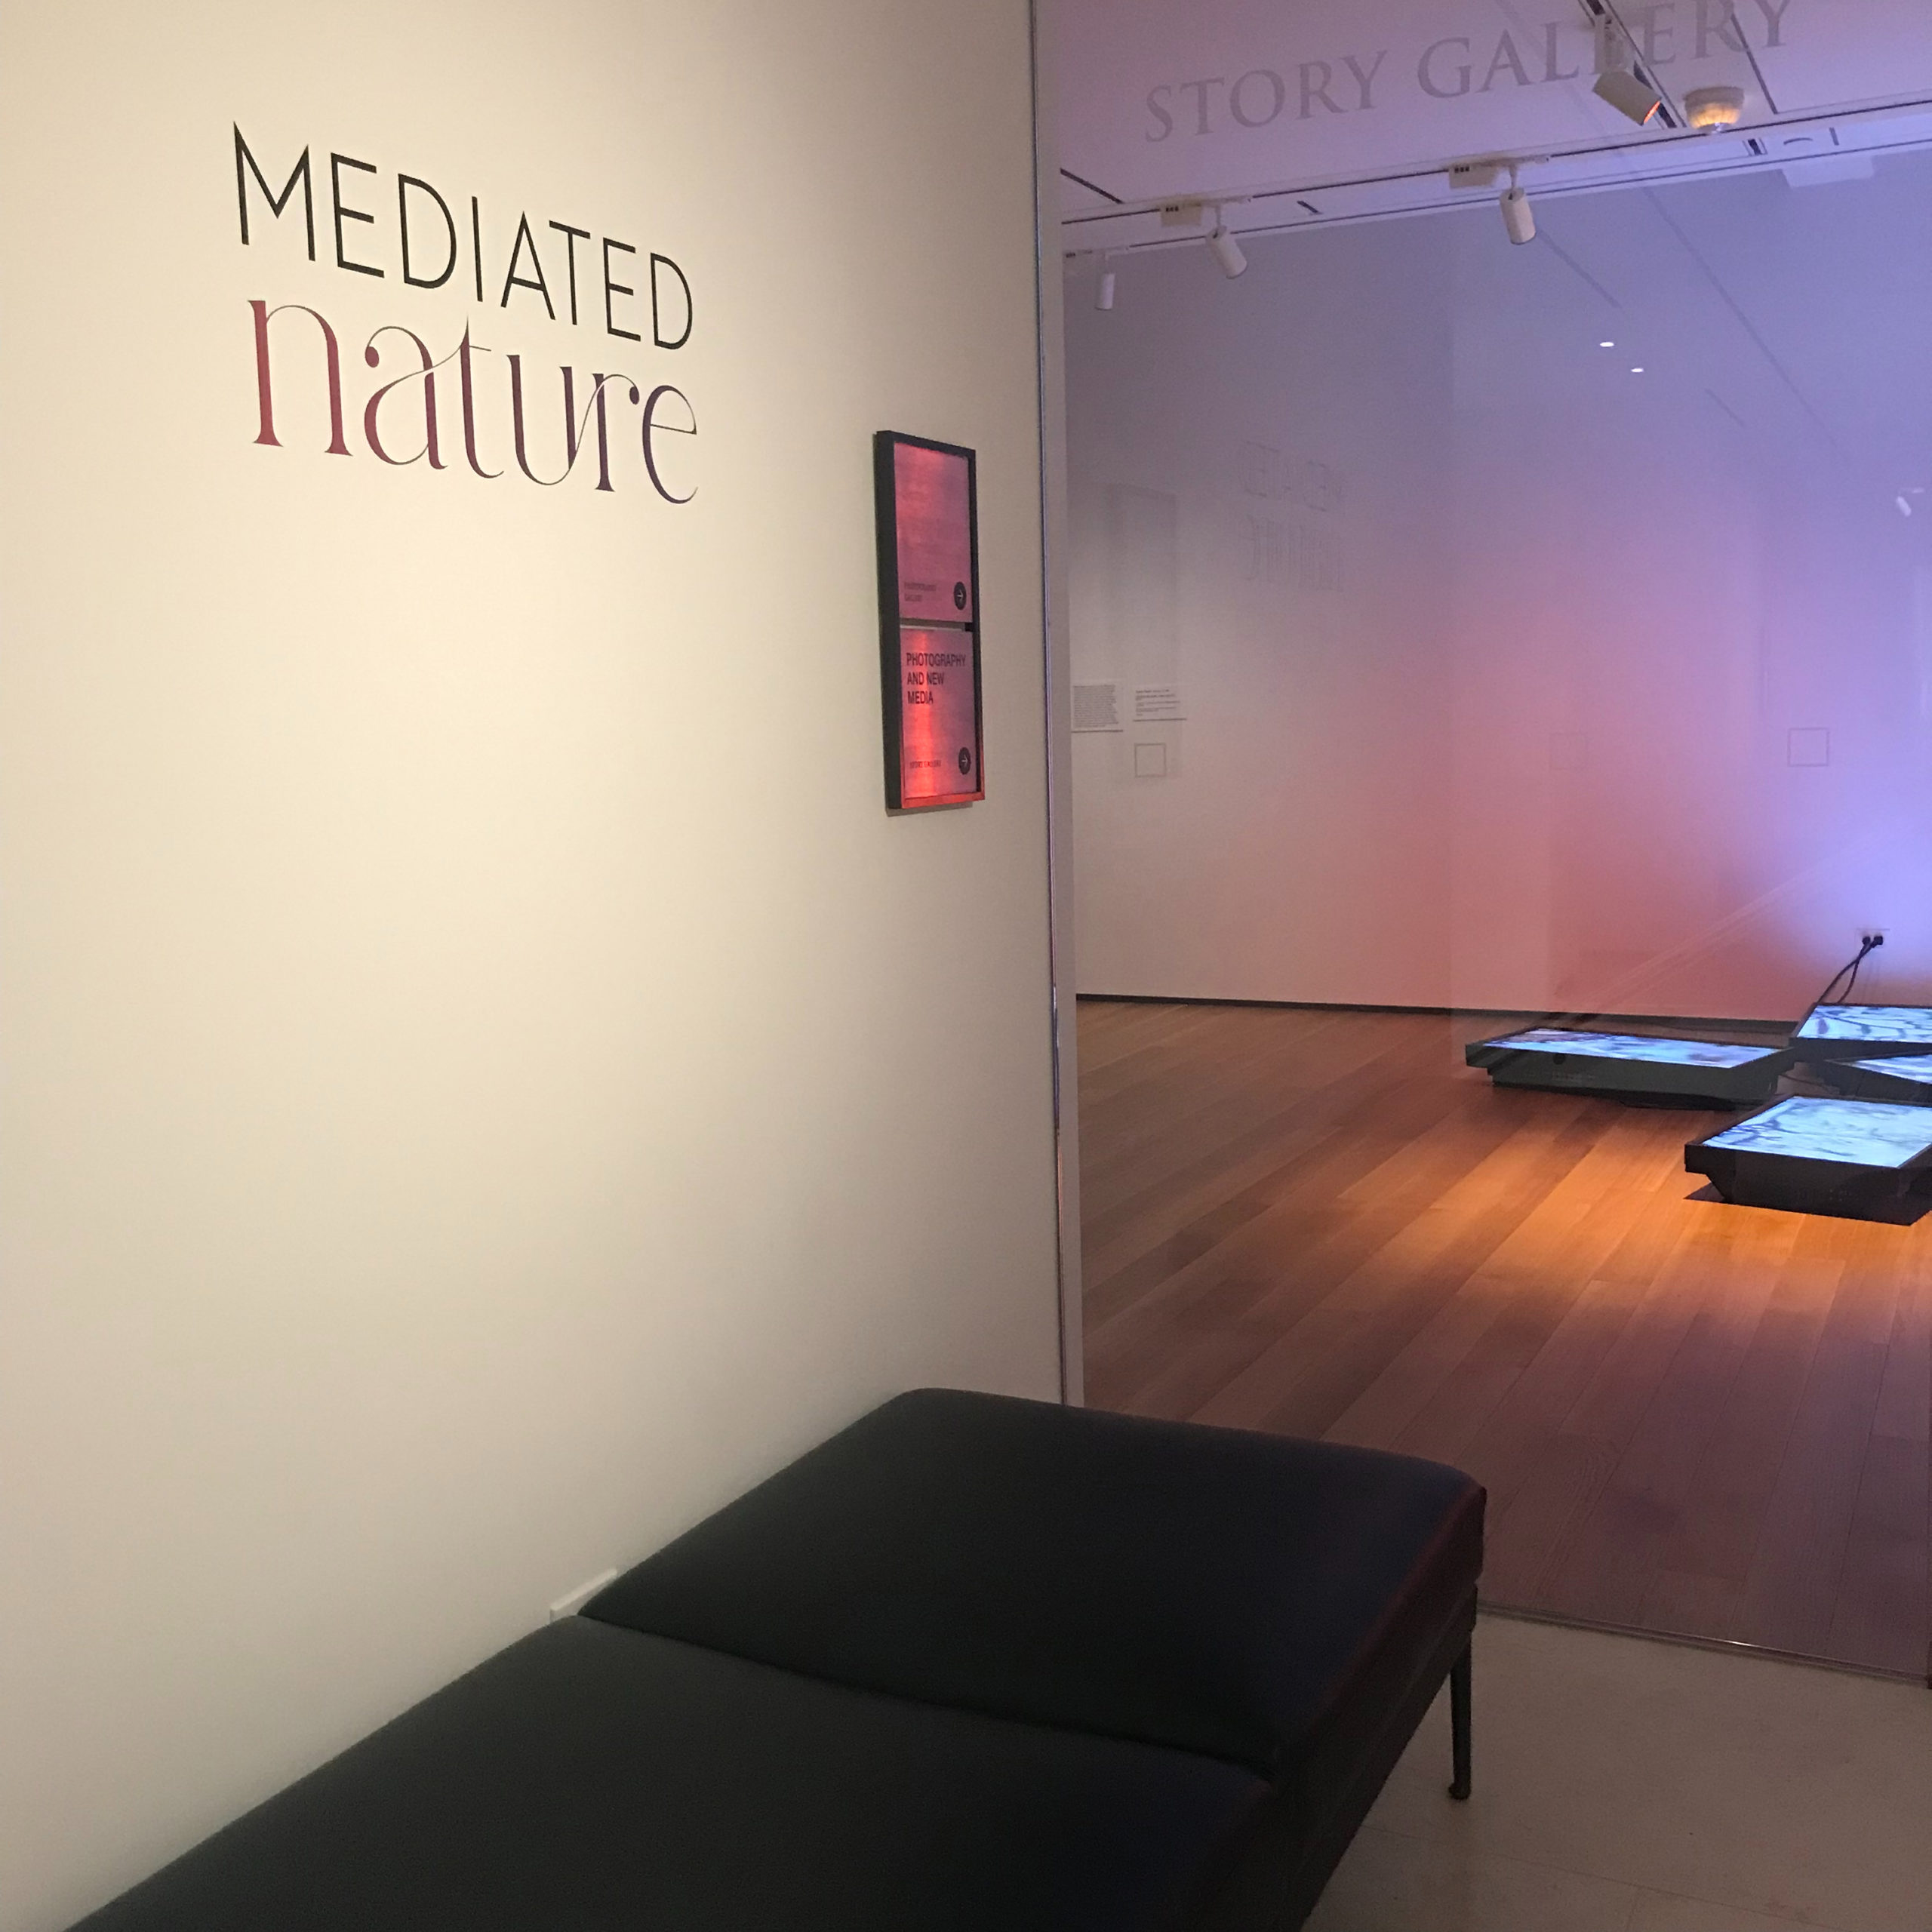 An example of vinyl Signage designed for the Santa Barbara Museum of Art's Mediated Nature exhibition